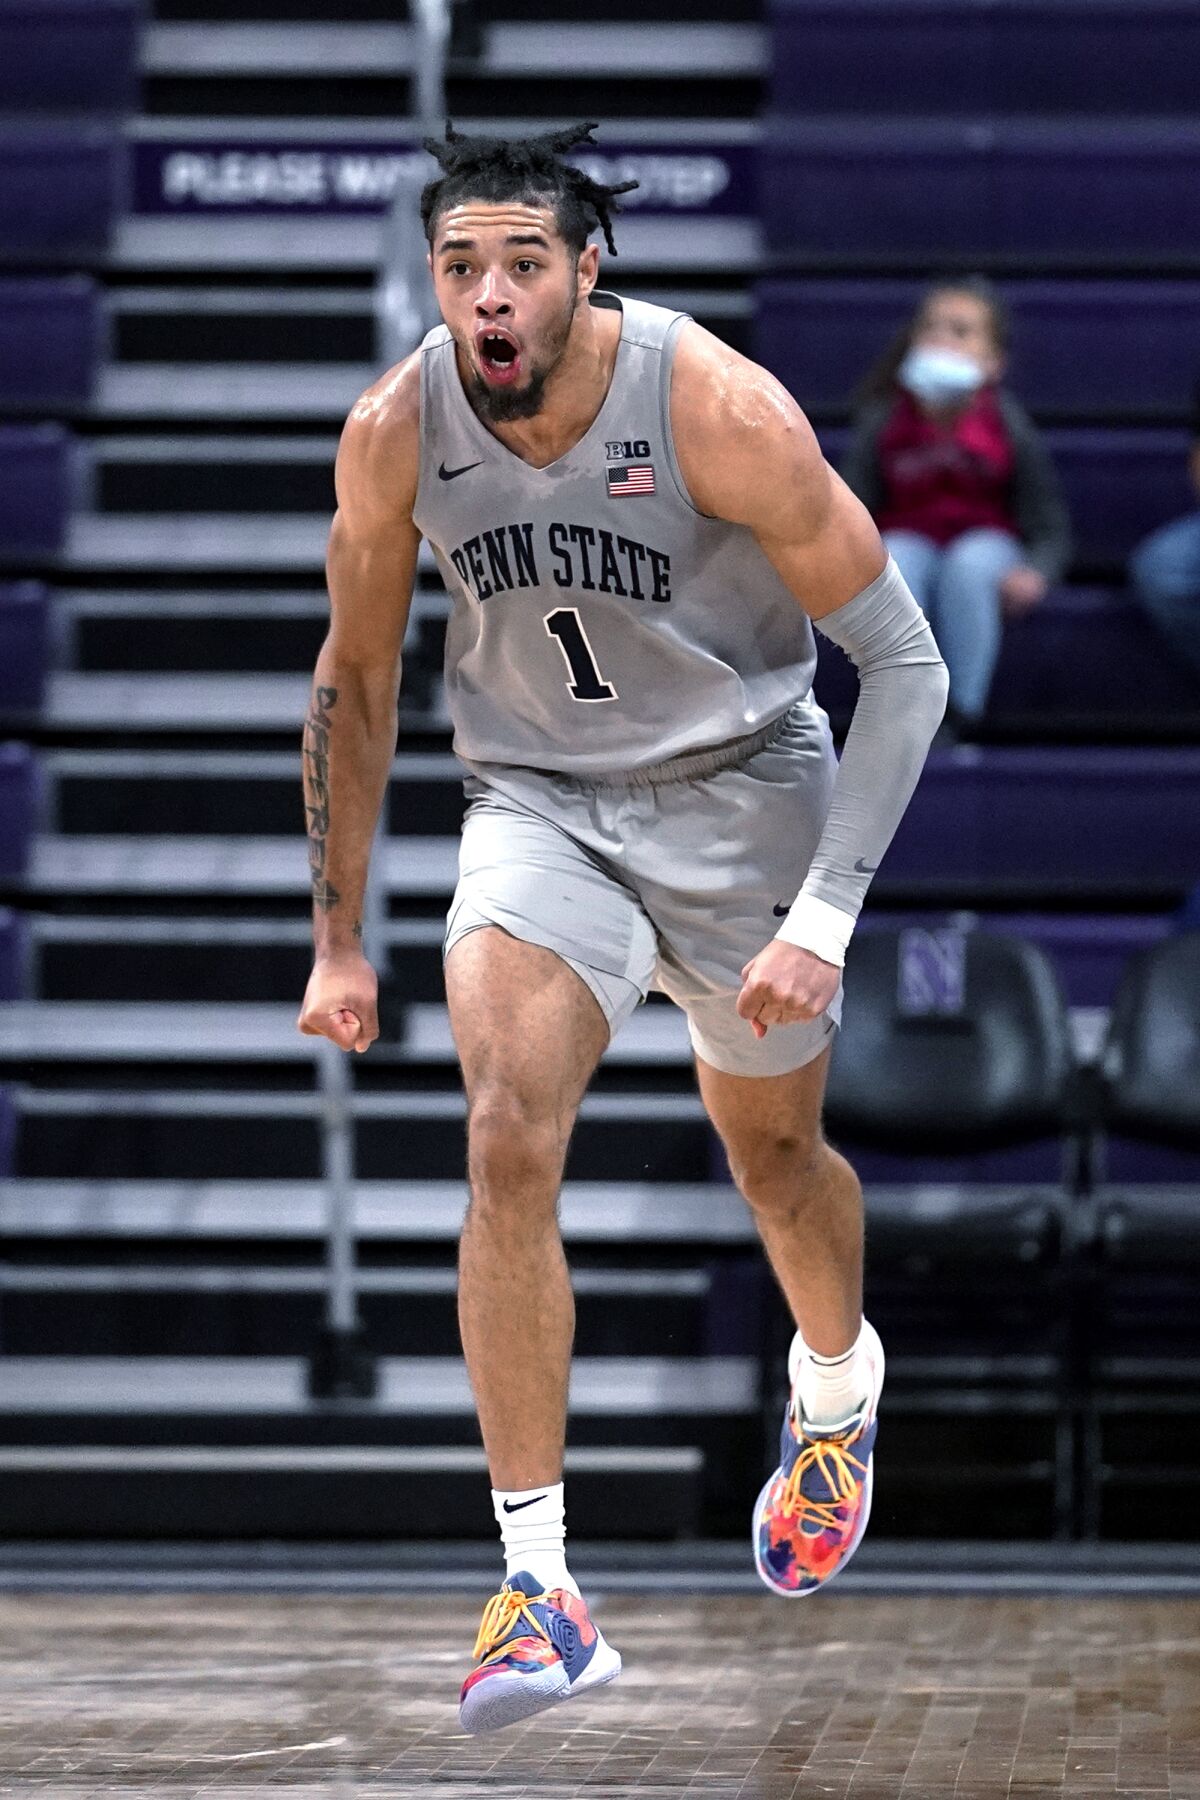 Penn State forward Seth Lundy reacts after hitting a 3-point shot during the second half of the team's NCAA college basketball game against Northwestern in Evanston, Ill., Wednesday, Jan. 5, 2022. Penn State won 74-70. (AP Photo/Nam Y. Huh)